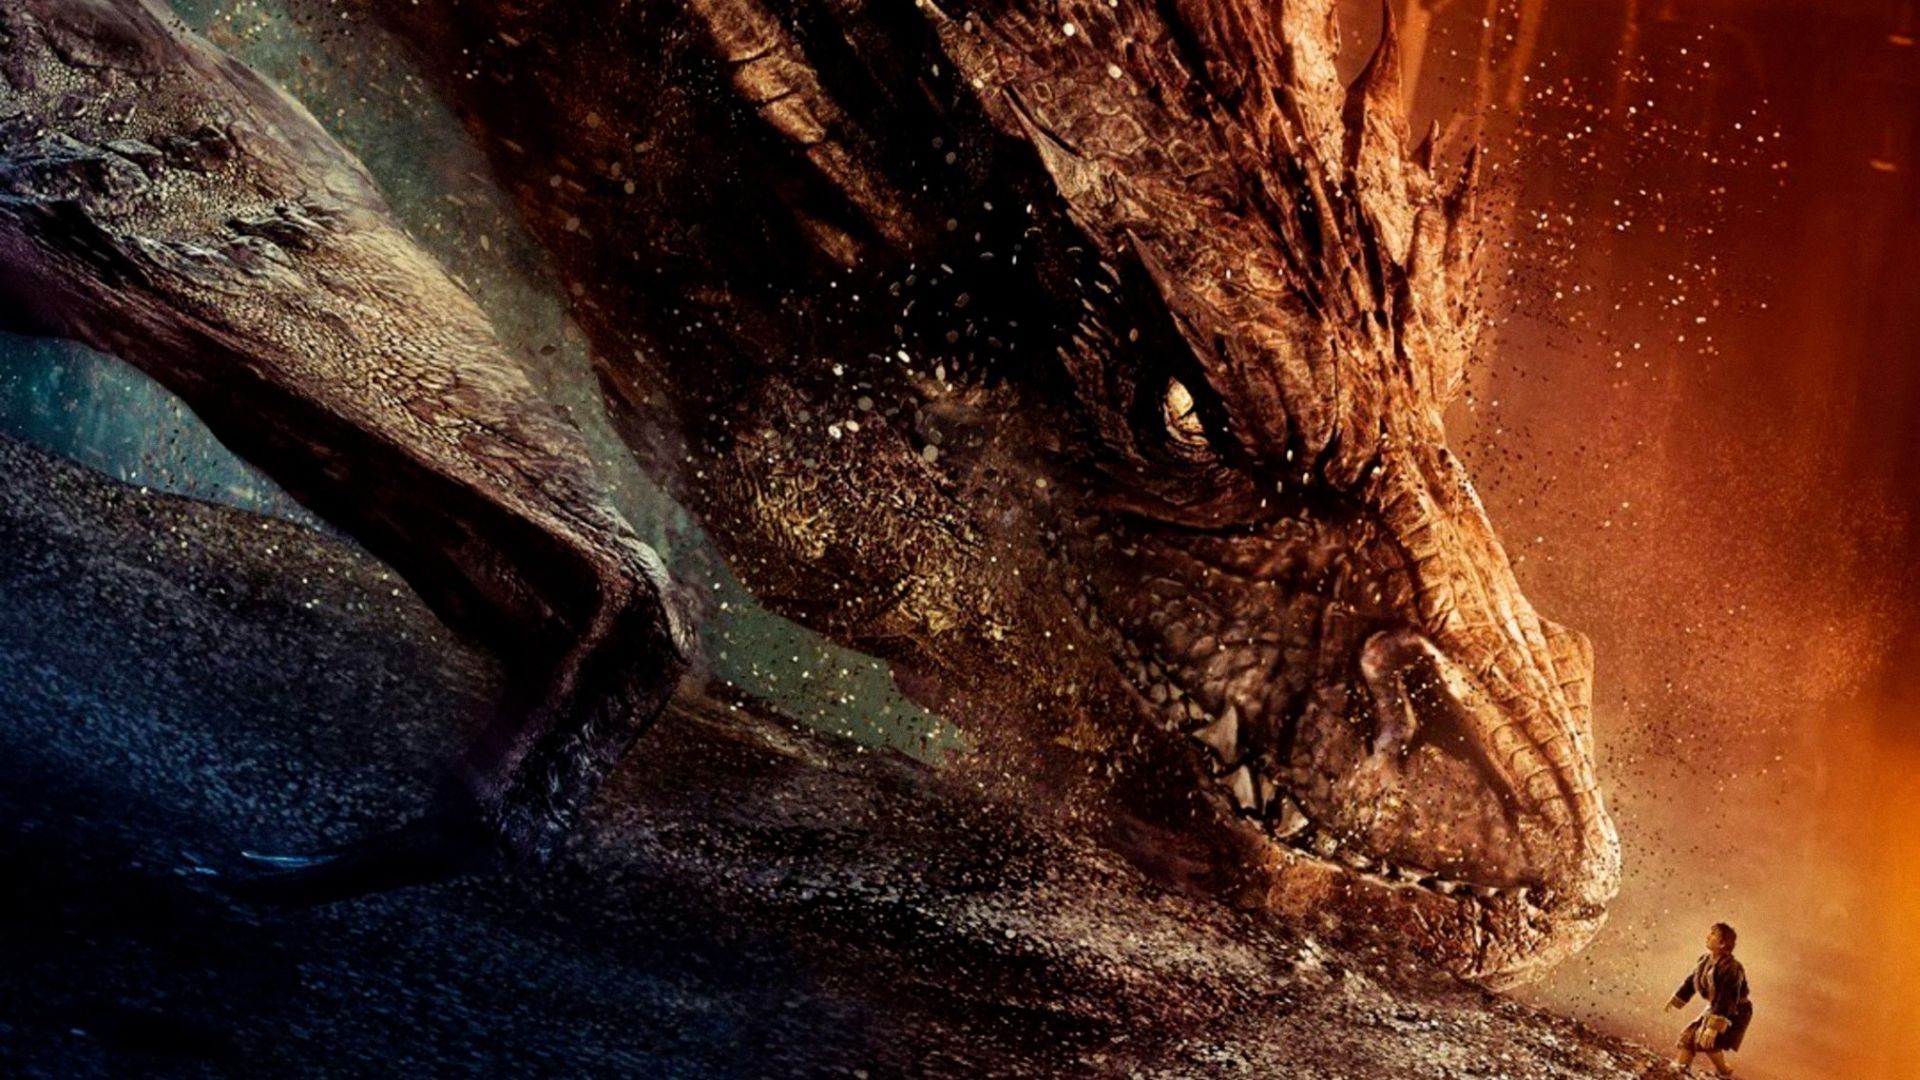 movie, the hobbit: the desolation of smaug, dragon, the lord of the rings